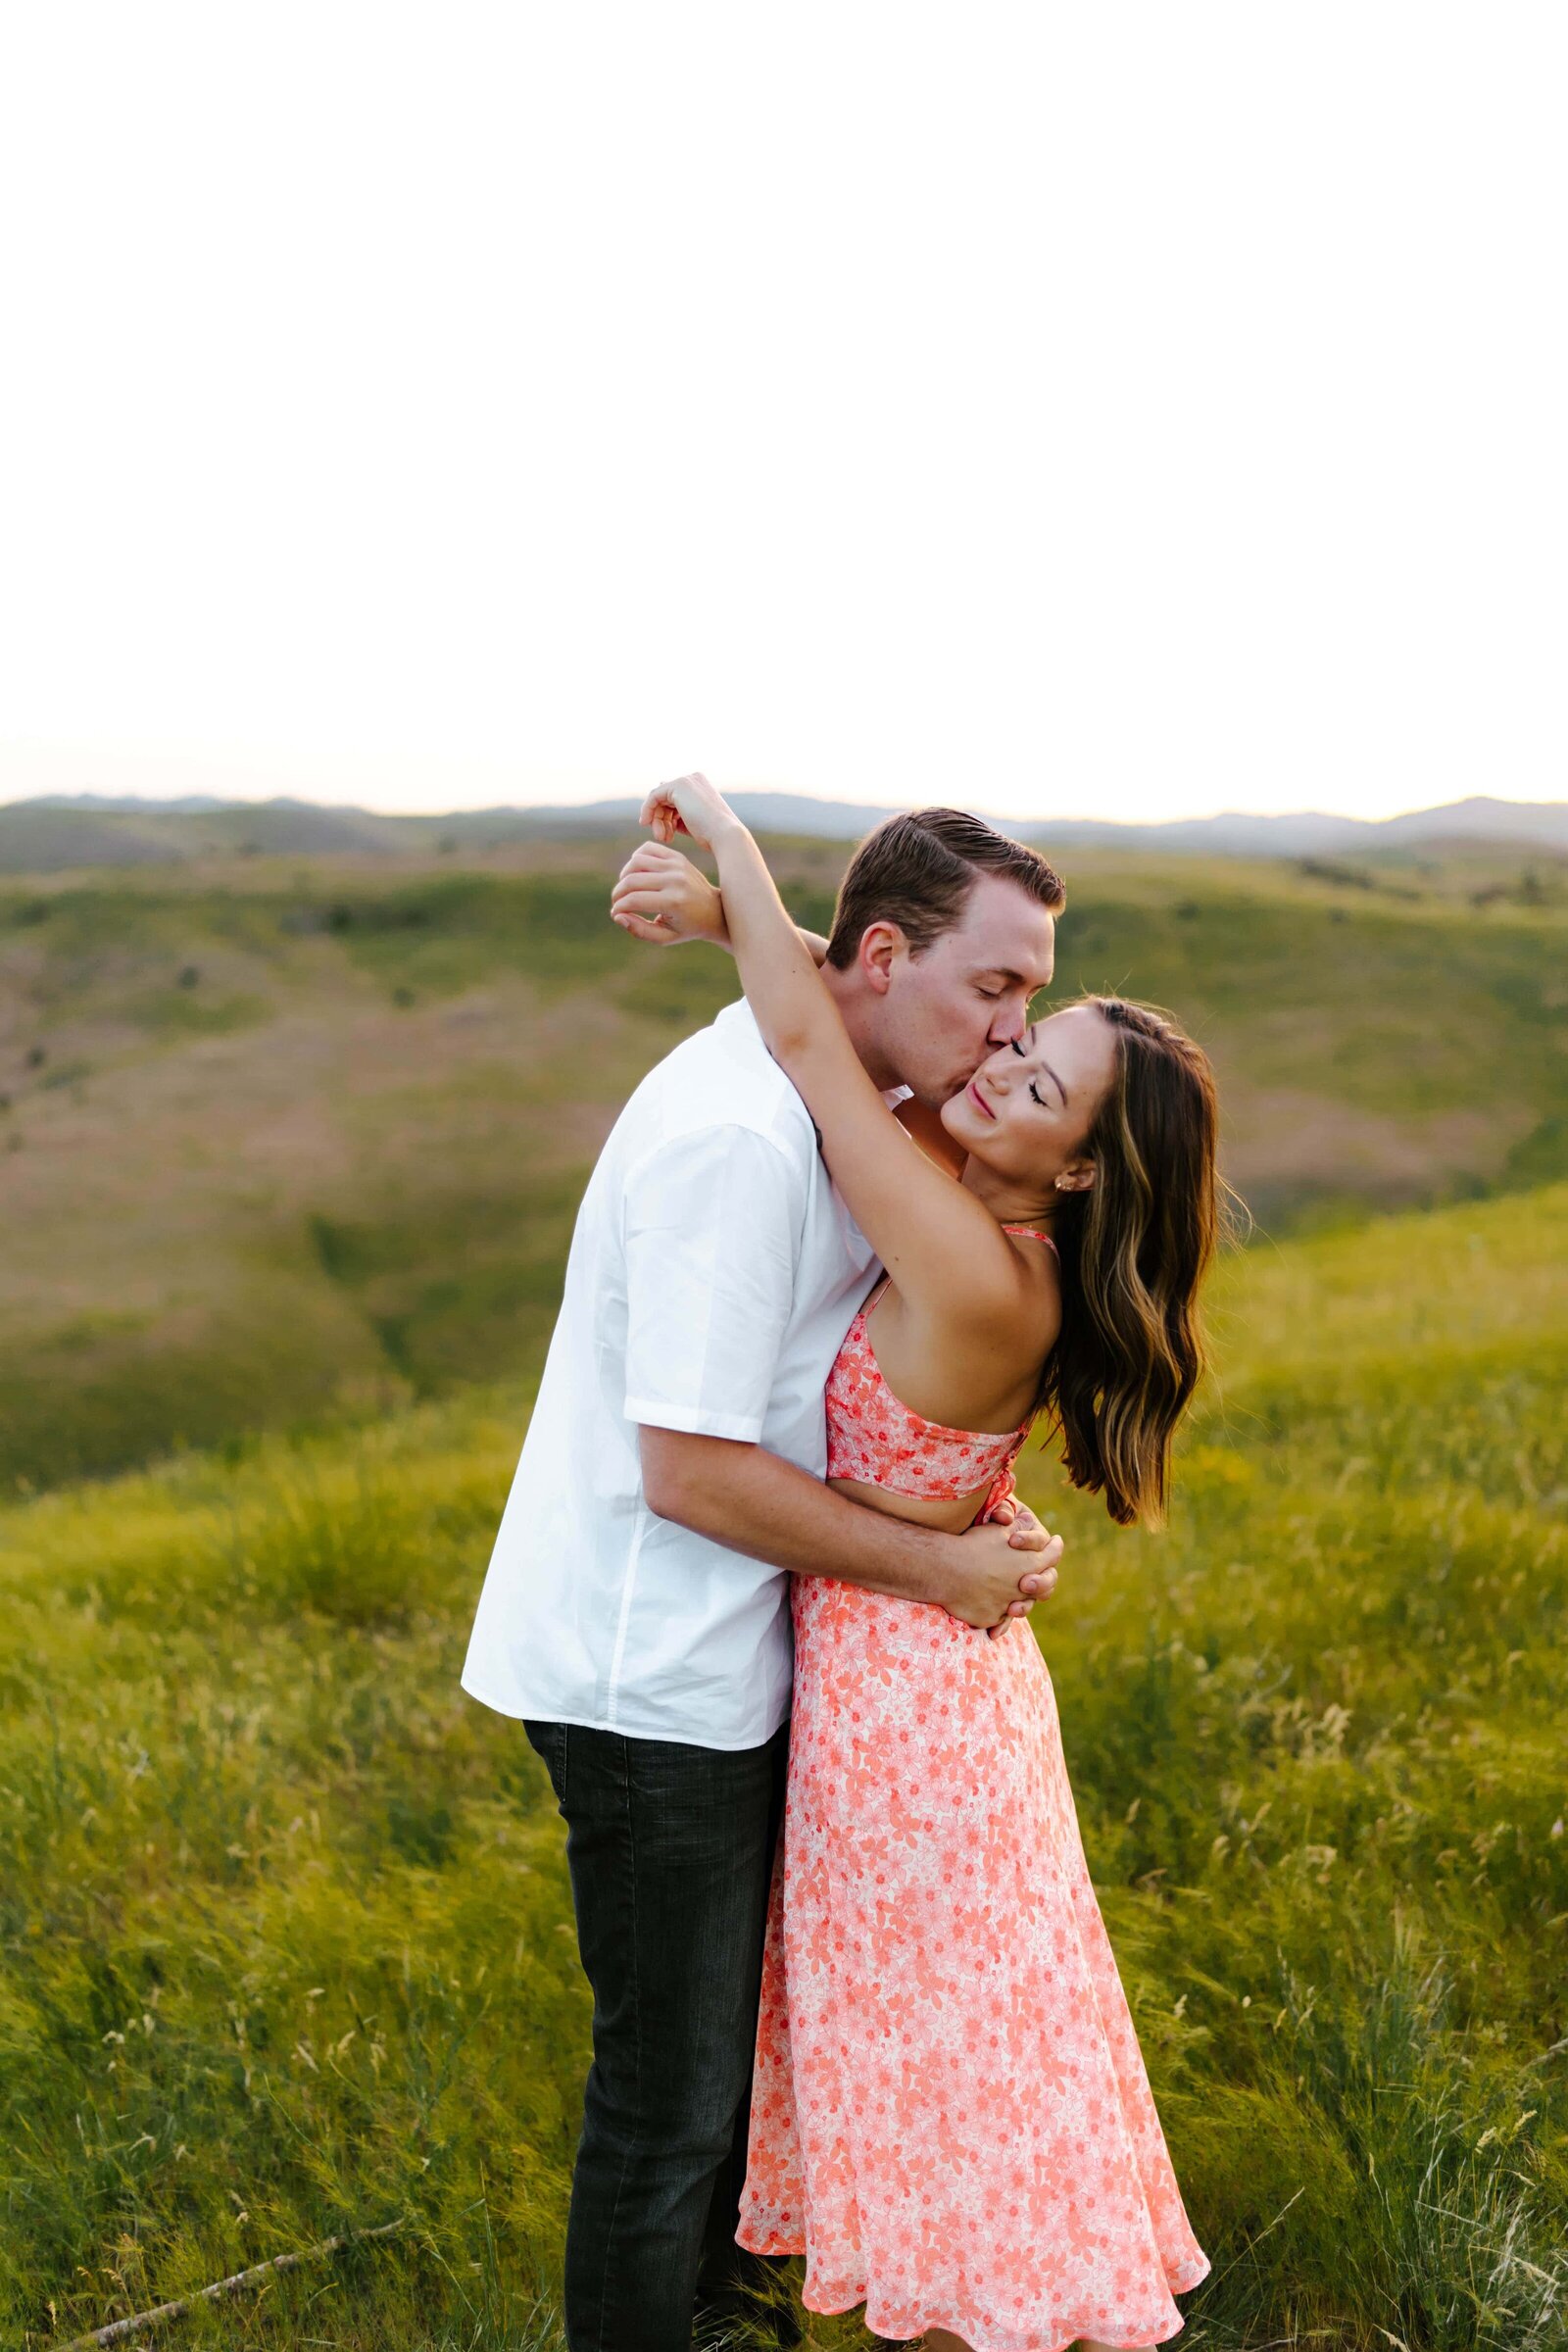 A couple embracing each other during their engagement photos in the hills above Boise, Idaho